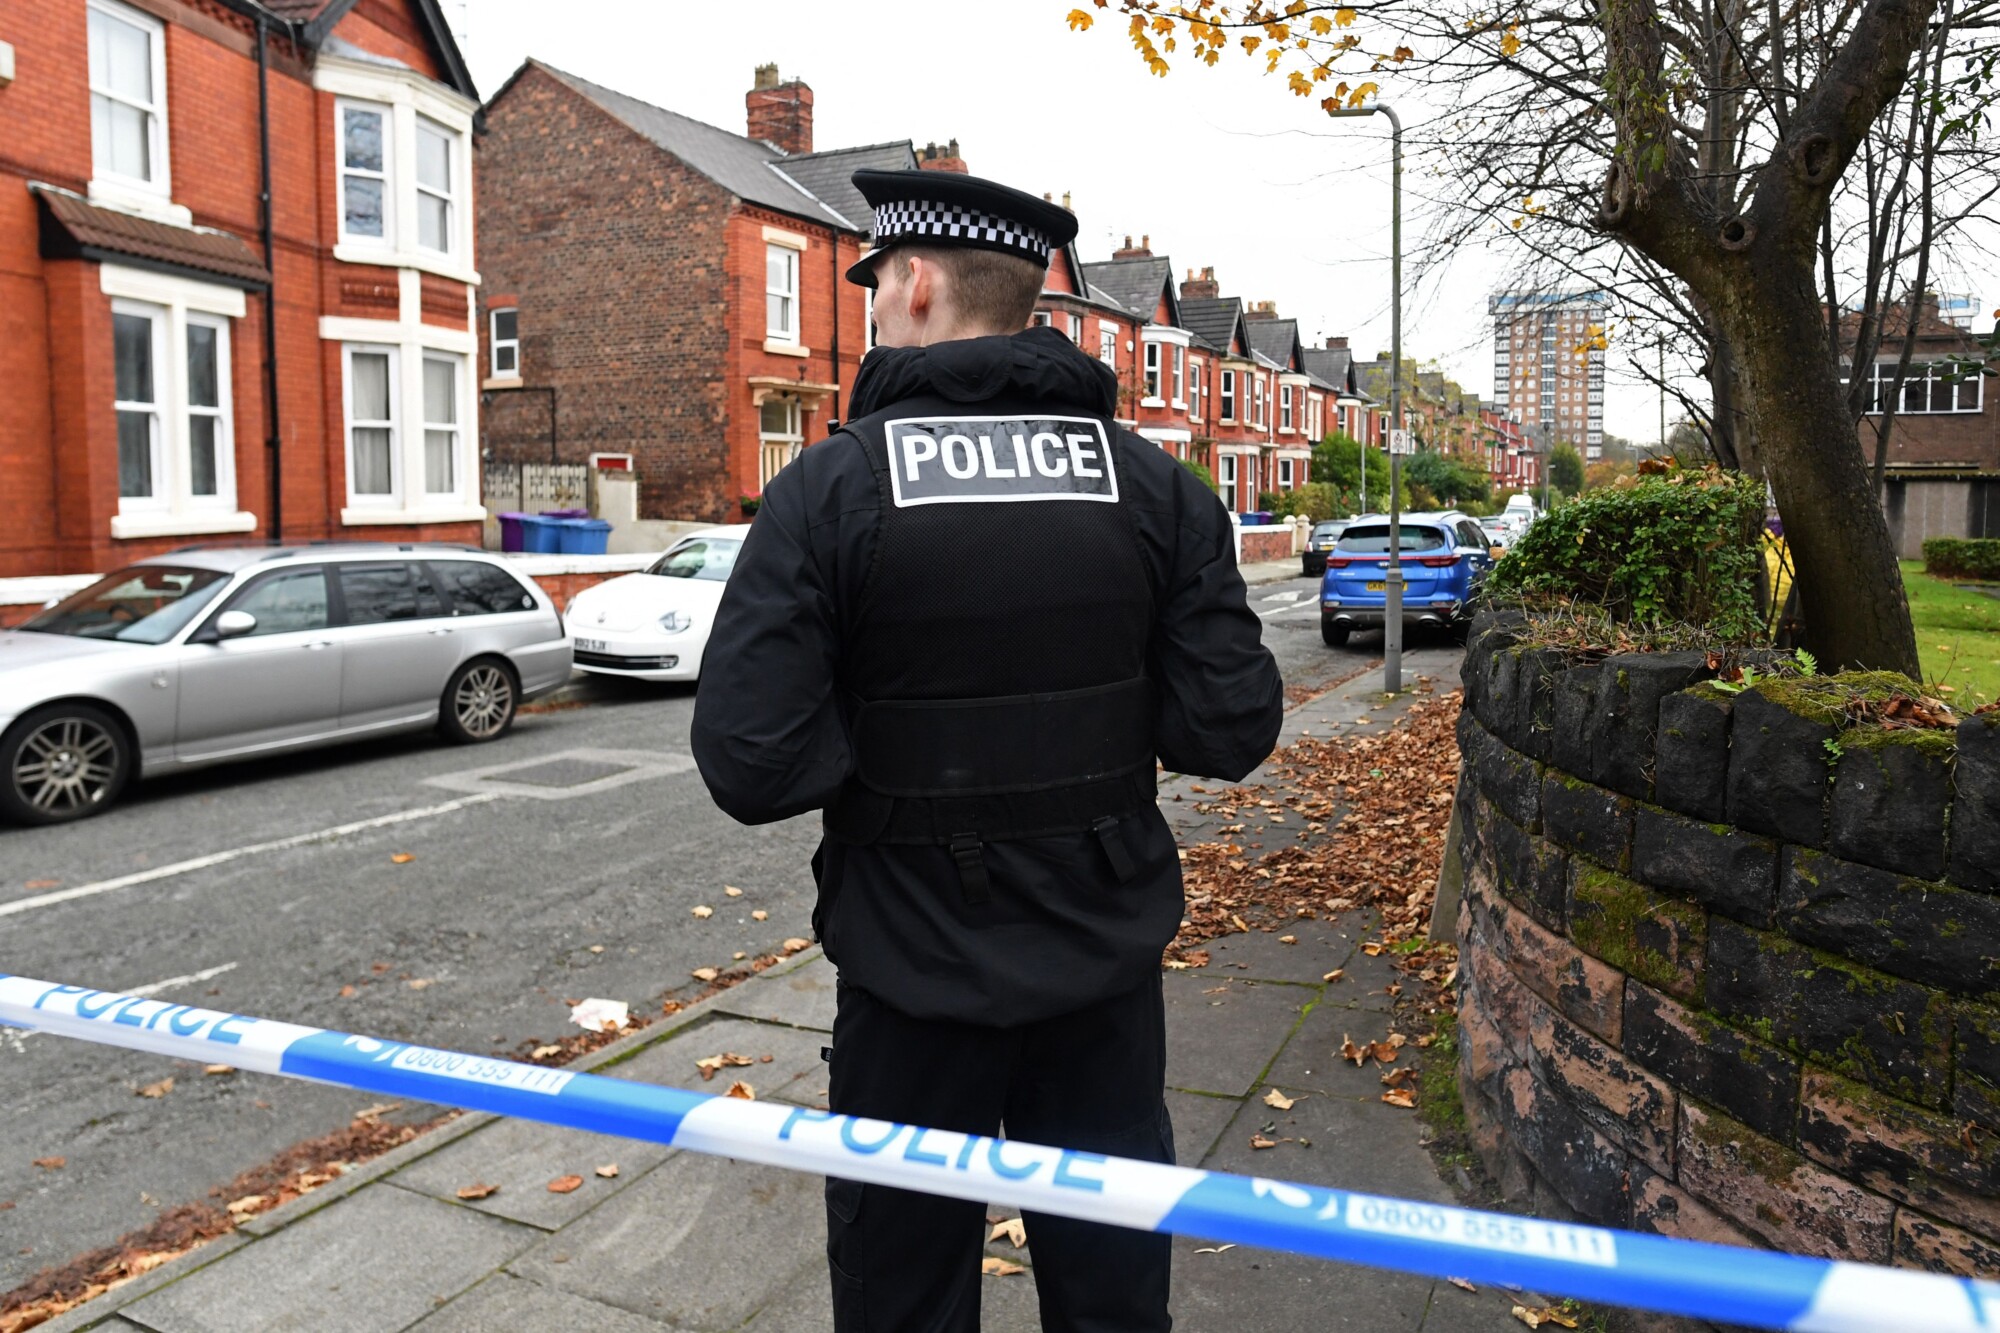 2 Arrested in UK in Connection With Texas Synagogue Hostage-Taker